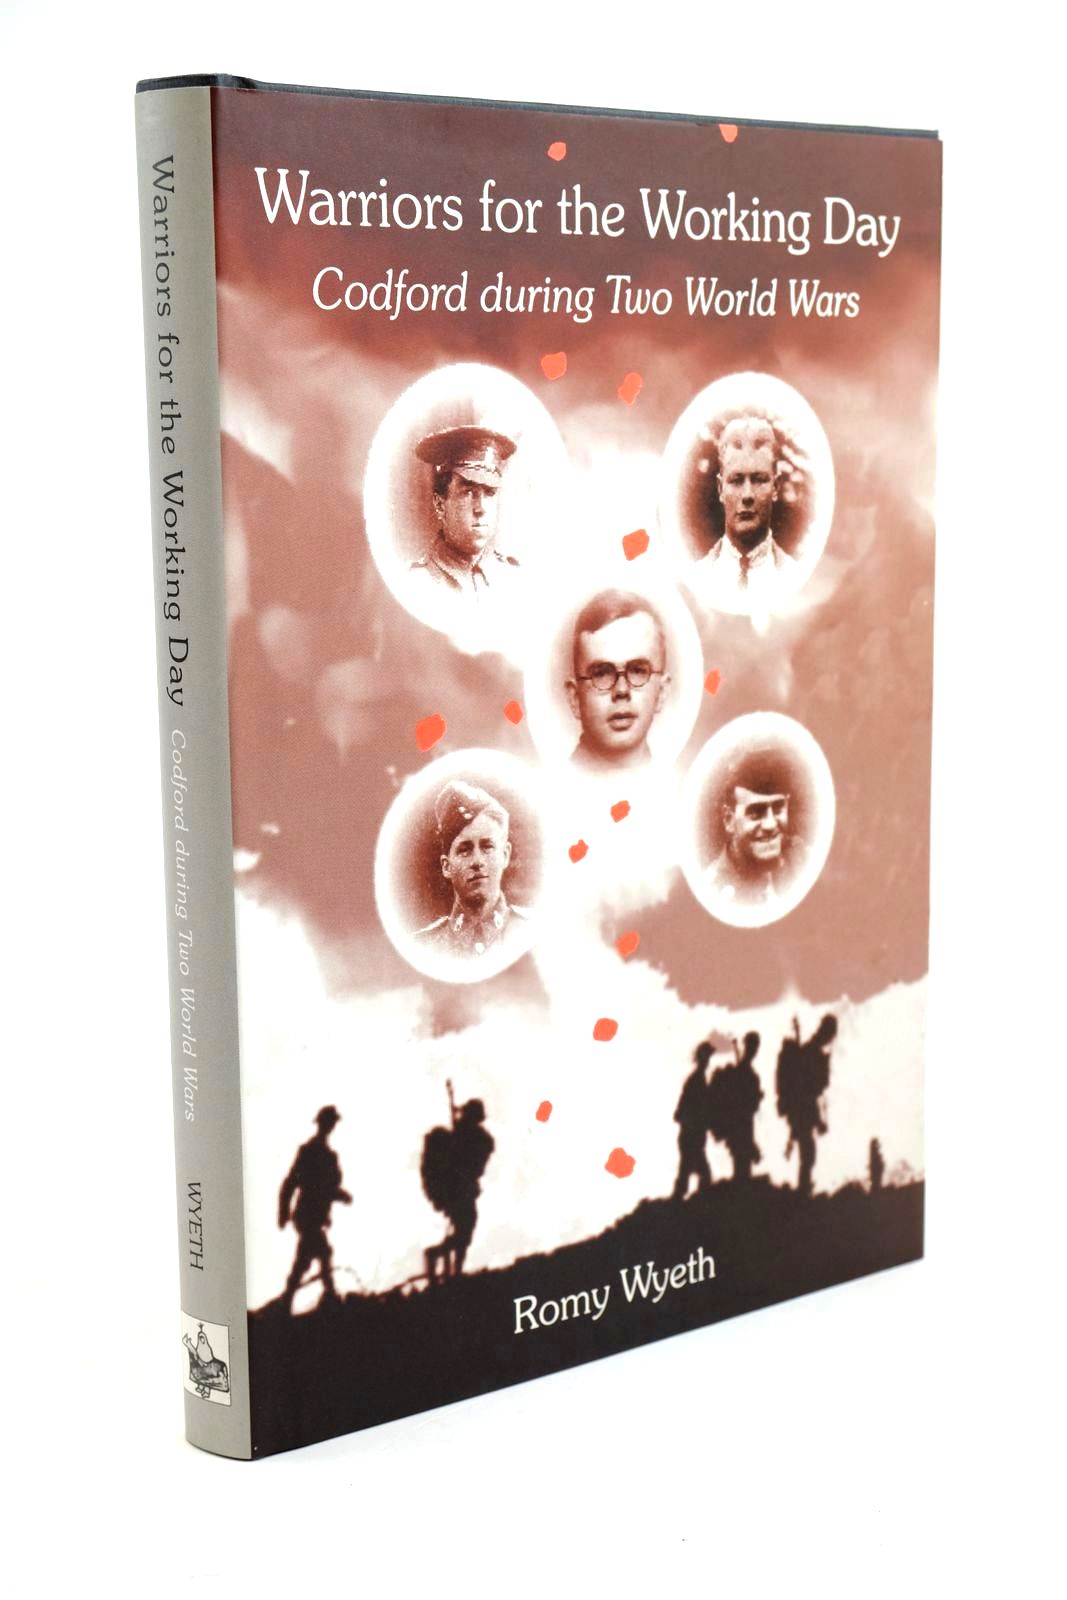 Photo of WARRIORS FOR THE WORKING DAY CODFORD DURING TWO WORLD WARS written by Wyeth, Romy published by The Hobnob Press (STOCK CODE: 1321494)  for sale by Stella & Rose's Books